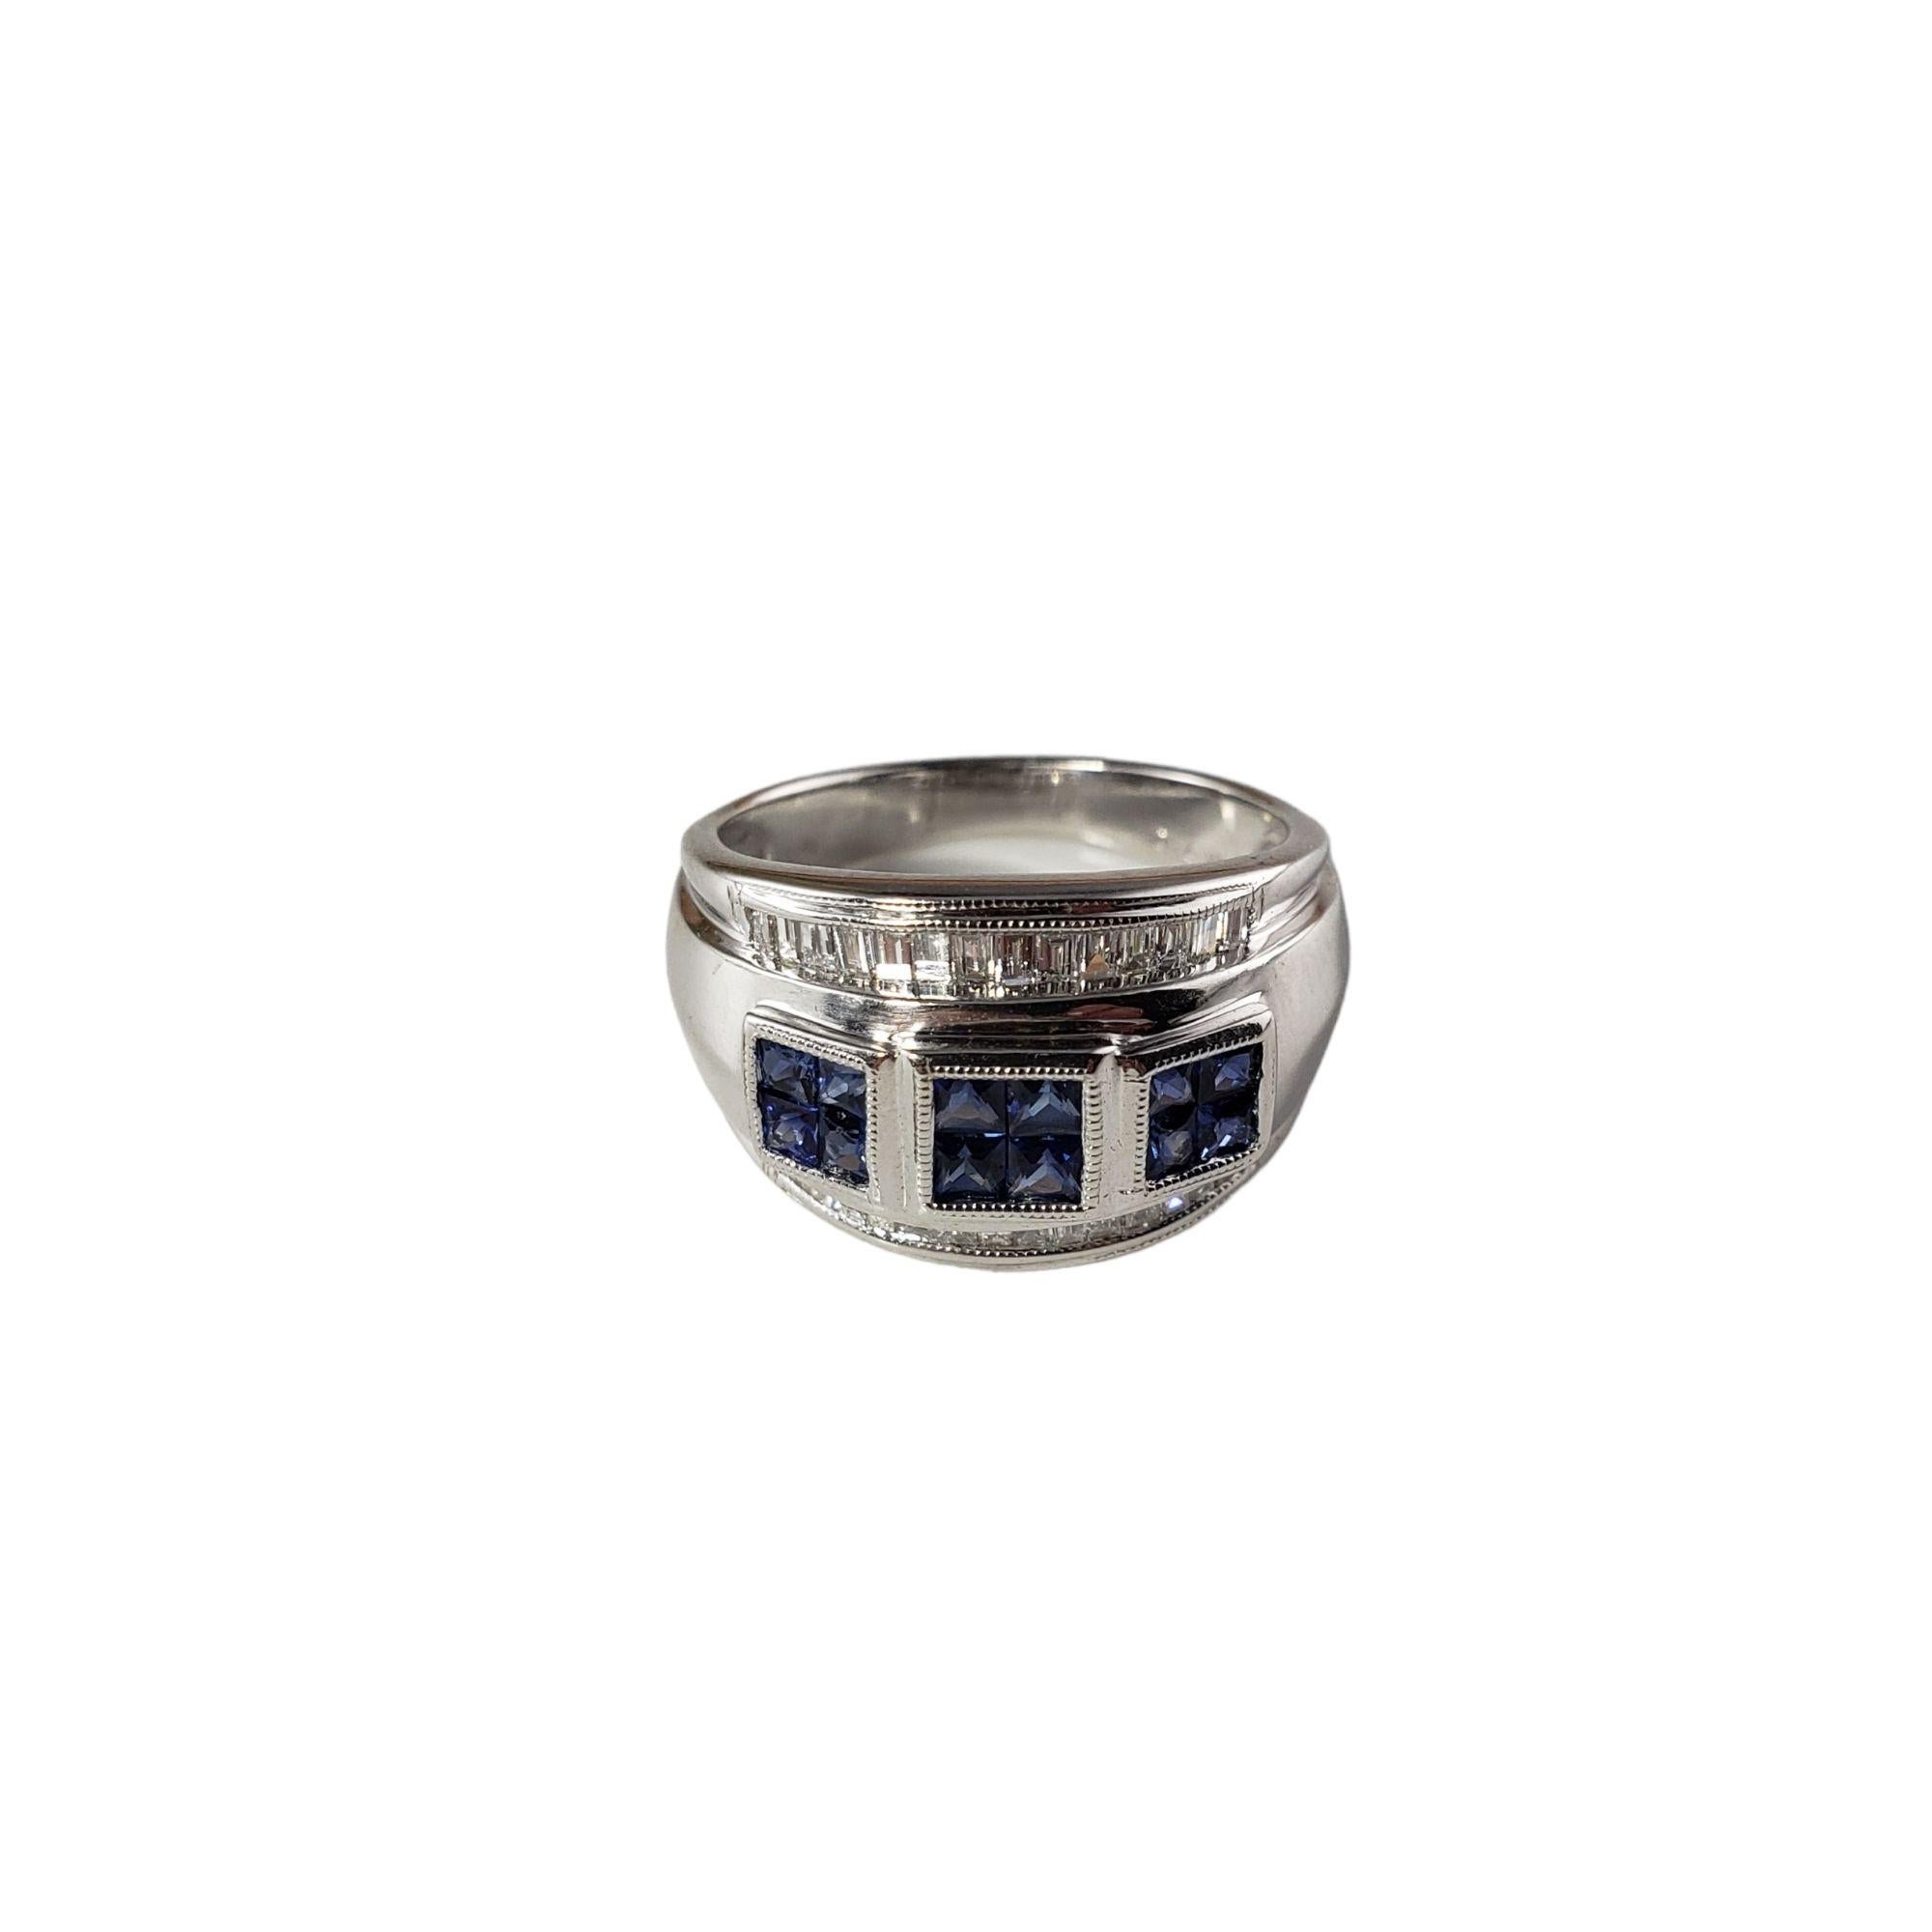 This lovely ring features 12 princess cut sapphires and 20 baguette diamonds set in classic 18K white gold.

Width: 13 mm.  Shank: 3 mm.

Total sapphire weight: .72 ct.

Total diamond weight: .51 ct.

Diamond color:  G-H

Diamond clarity: 